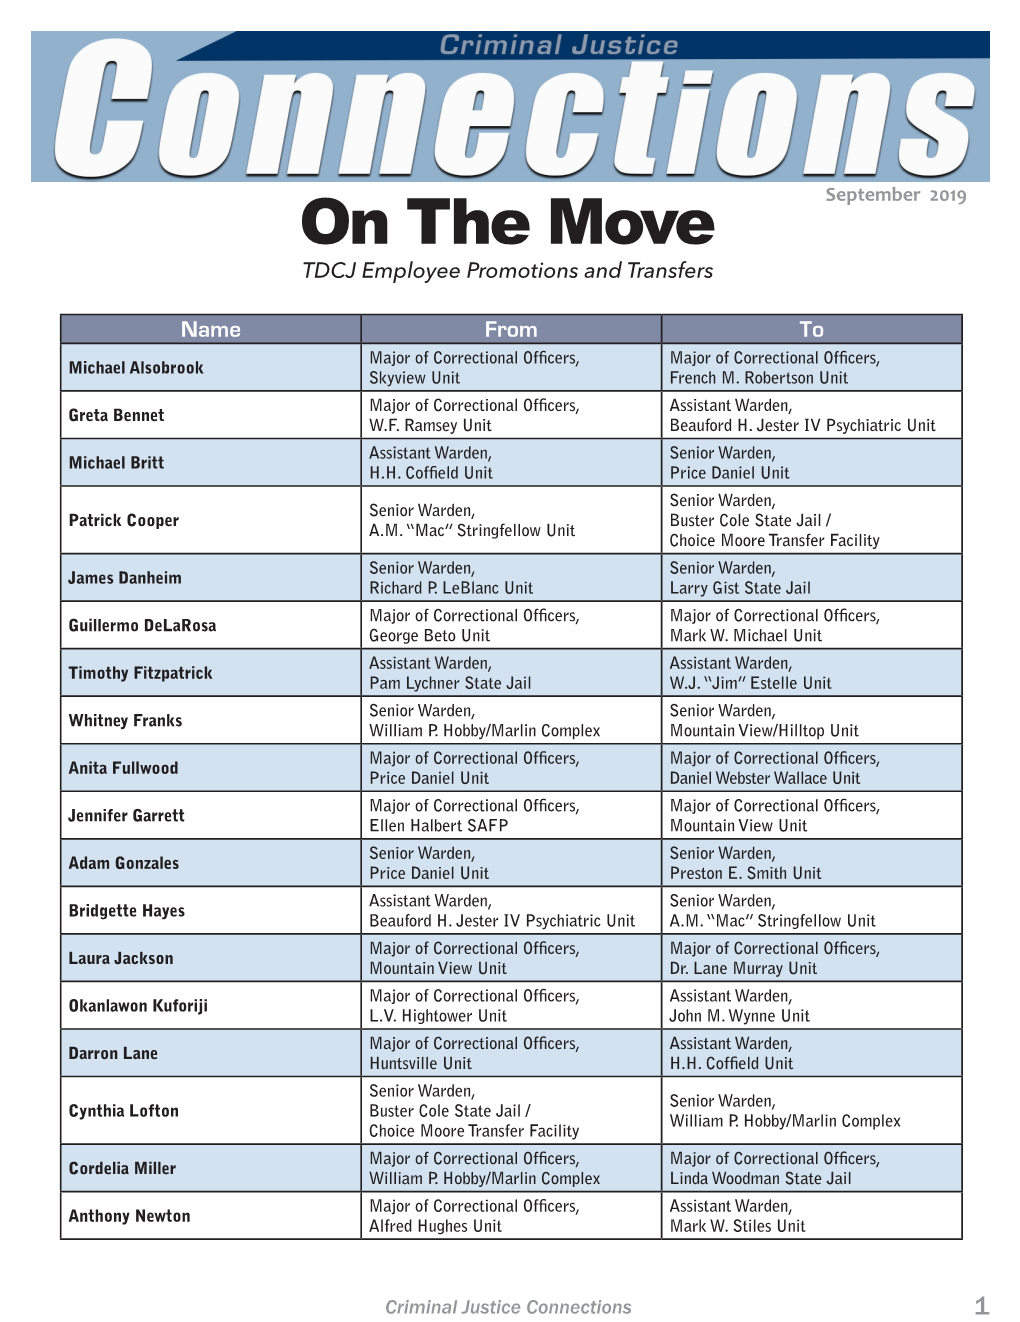 On the Move, September 2019